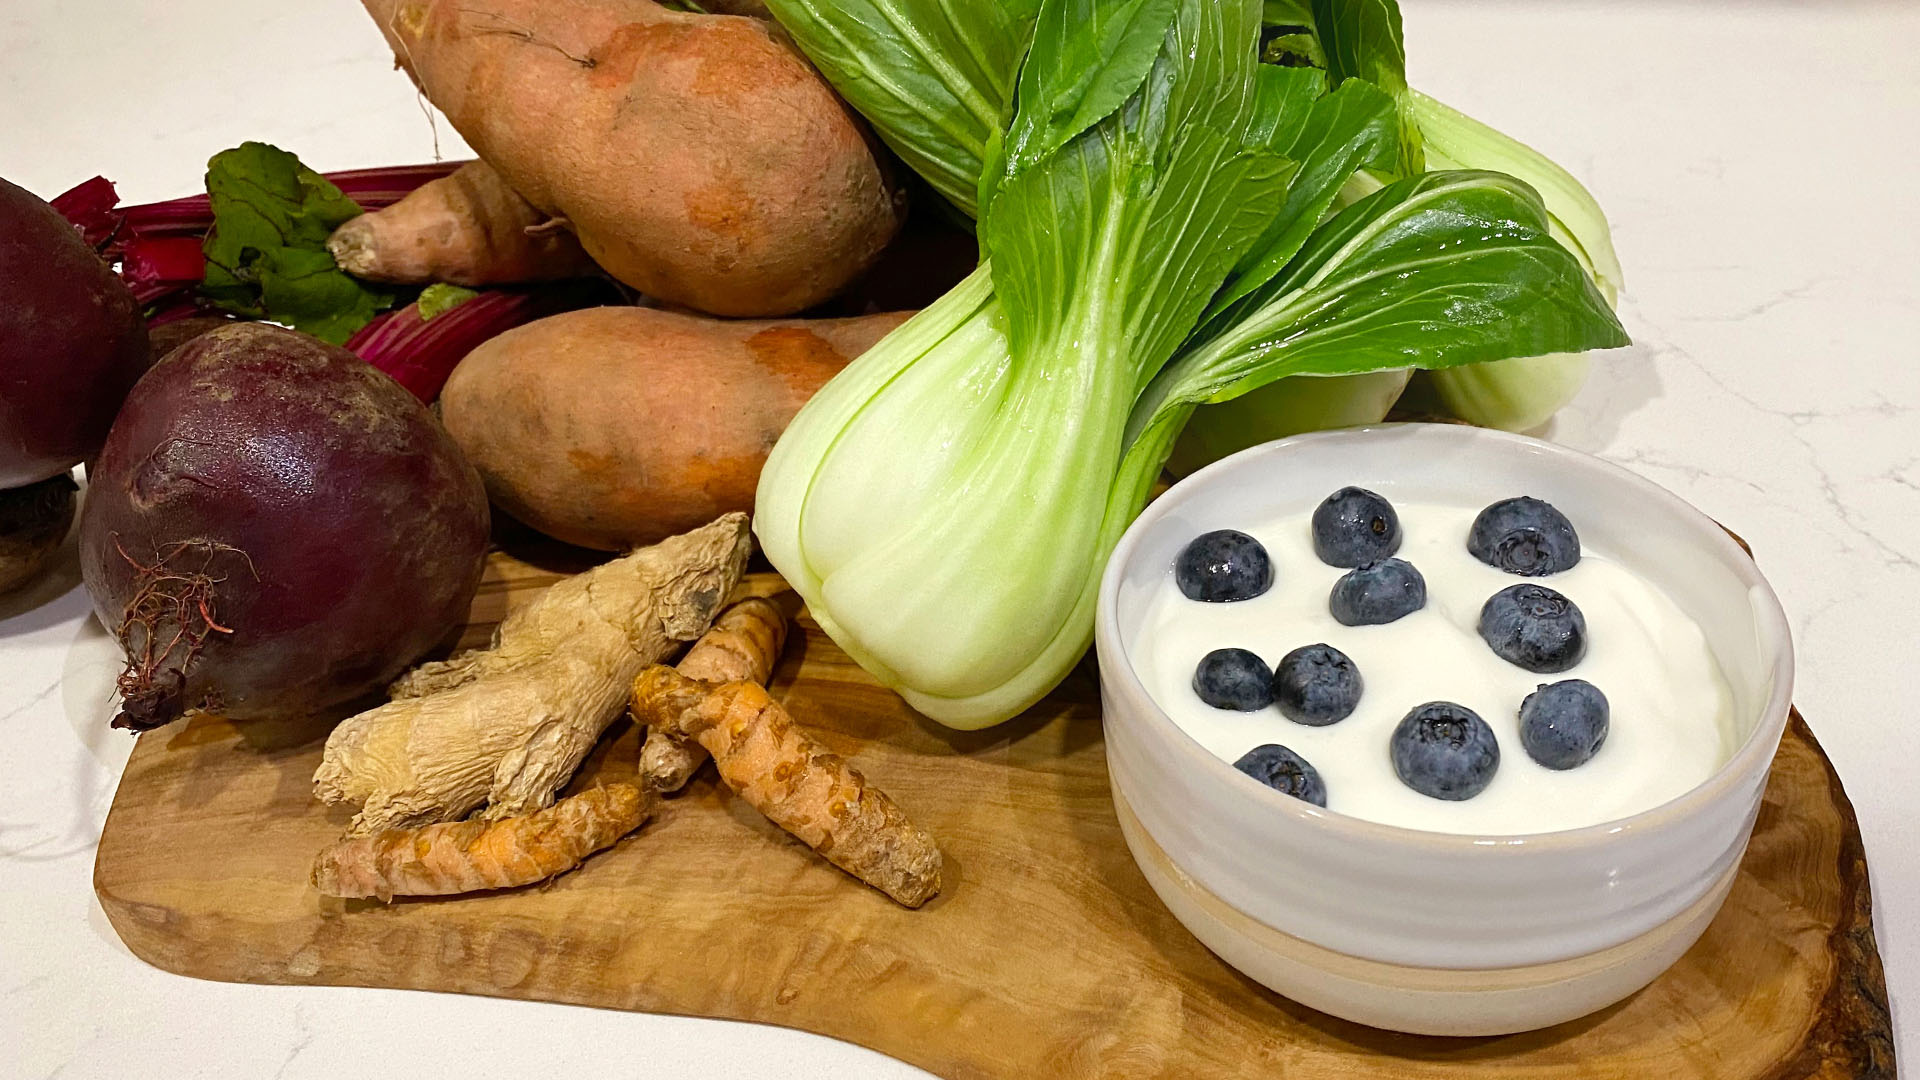 A wooden board with vegetables and a bowl of yogurt with blueberries.